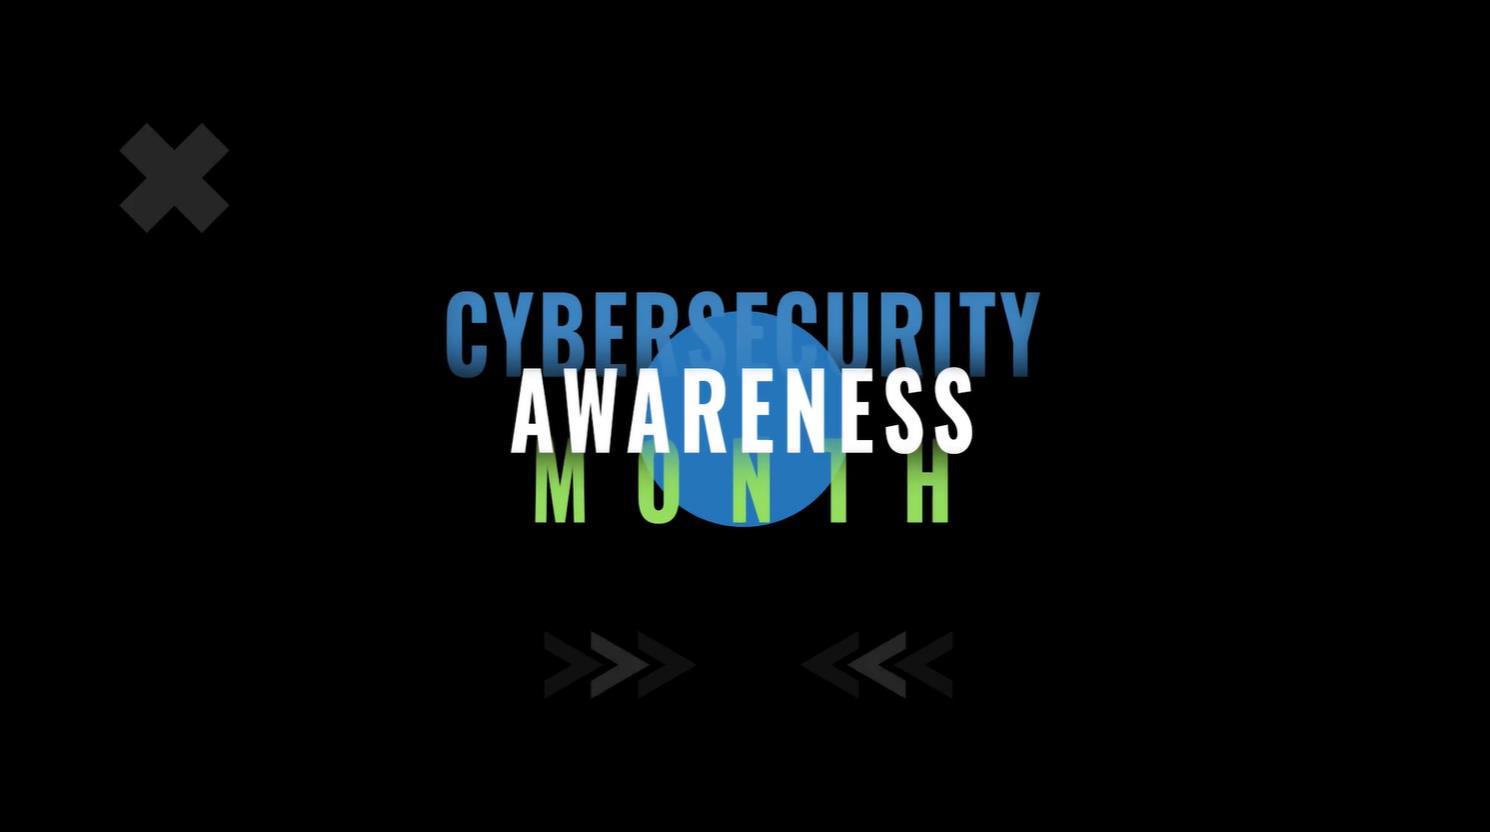 Cybersecurity Awareness Month Video Cover Photo (Oct 31st)